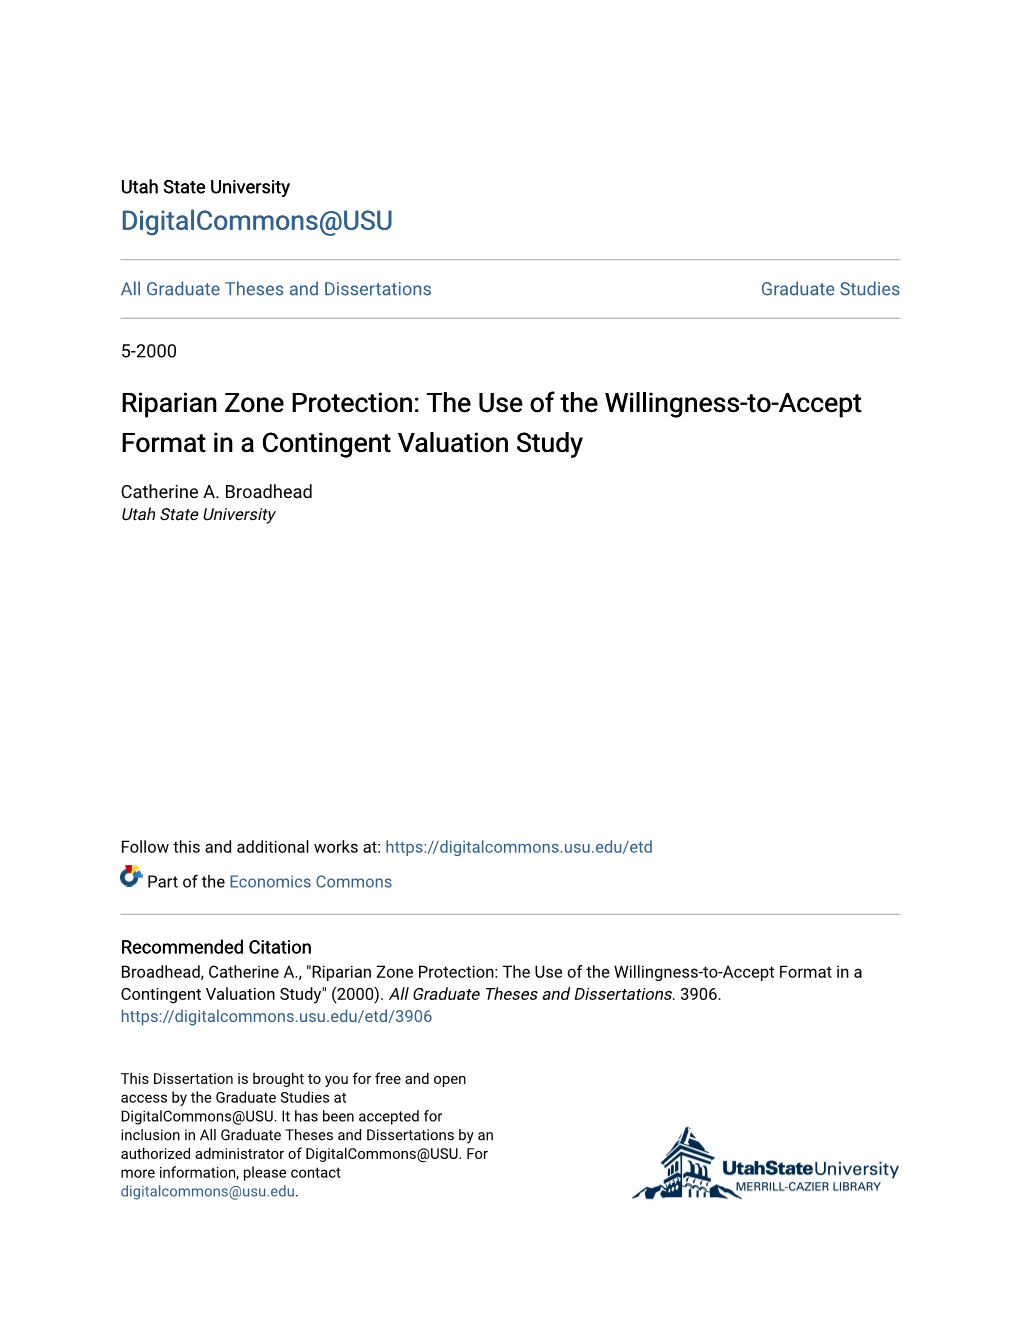 The Use of the Willingness-To-Accept Format in a Contingent Valuation Study